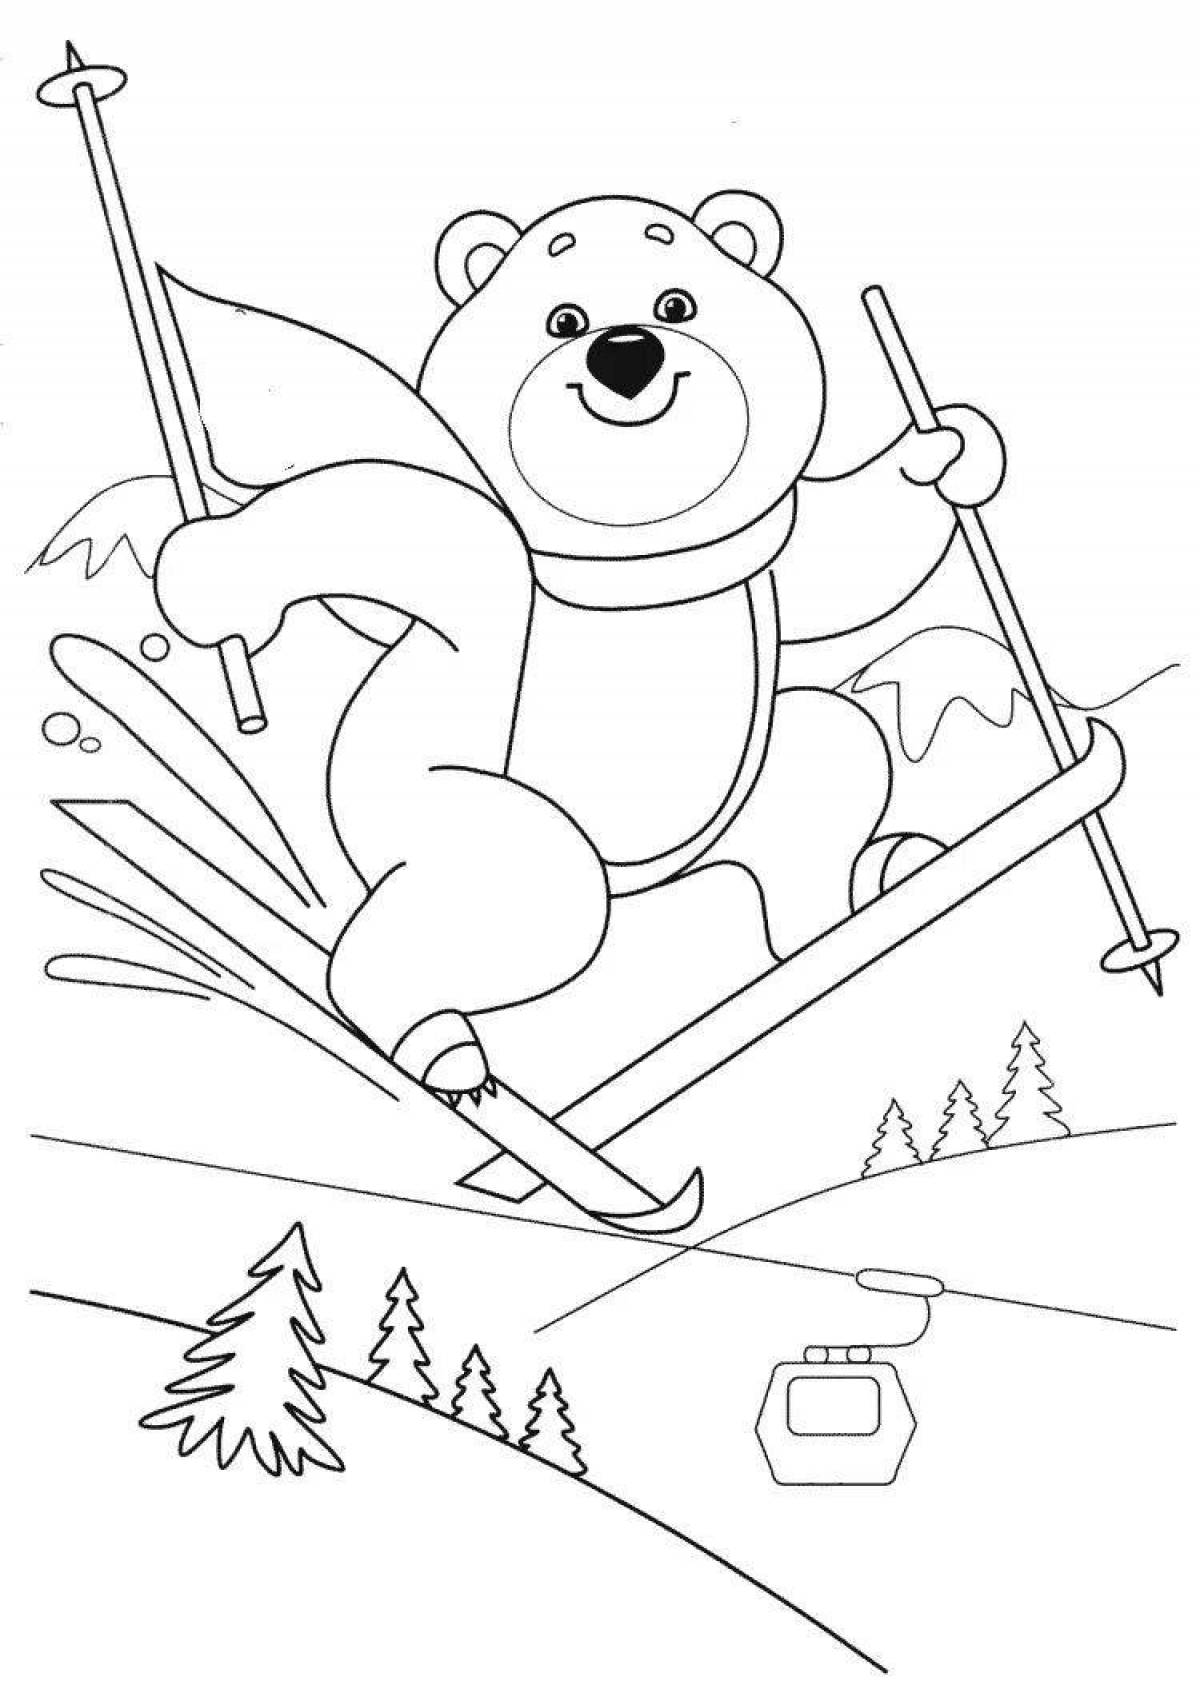 A fun coloring book for kids playing olympic sports